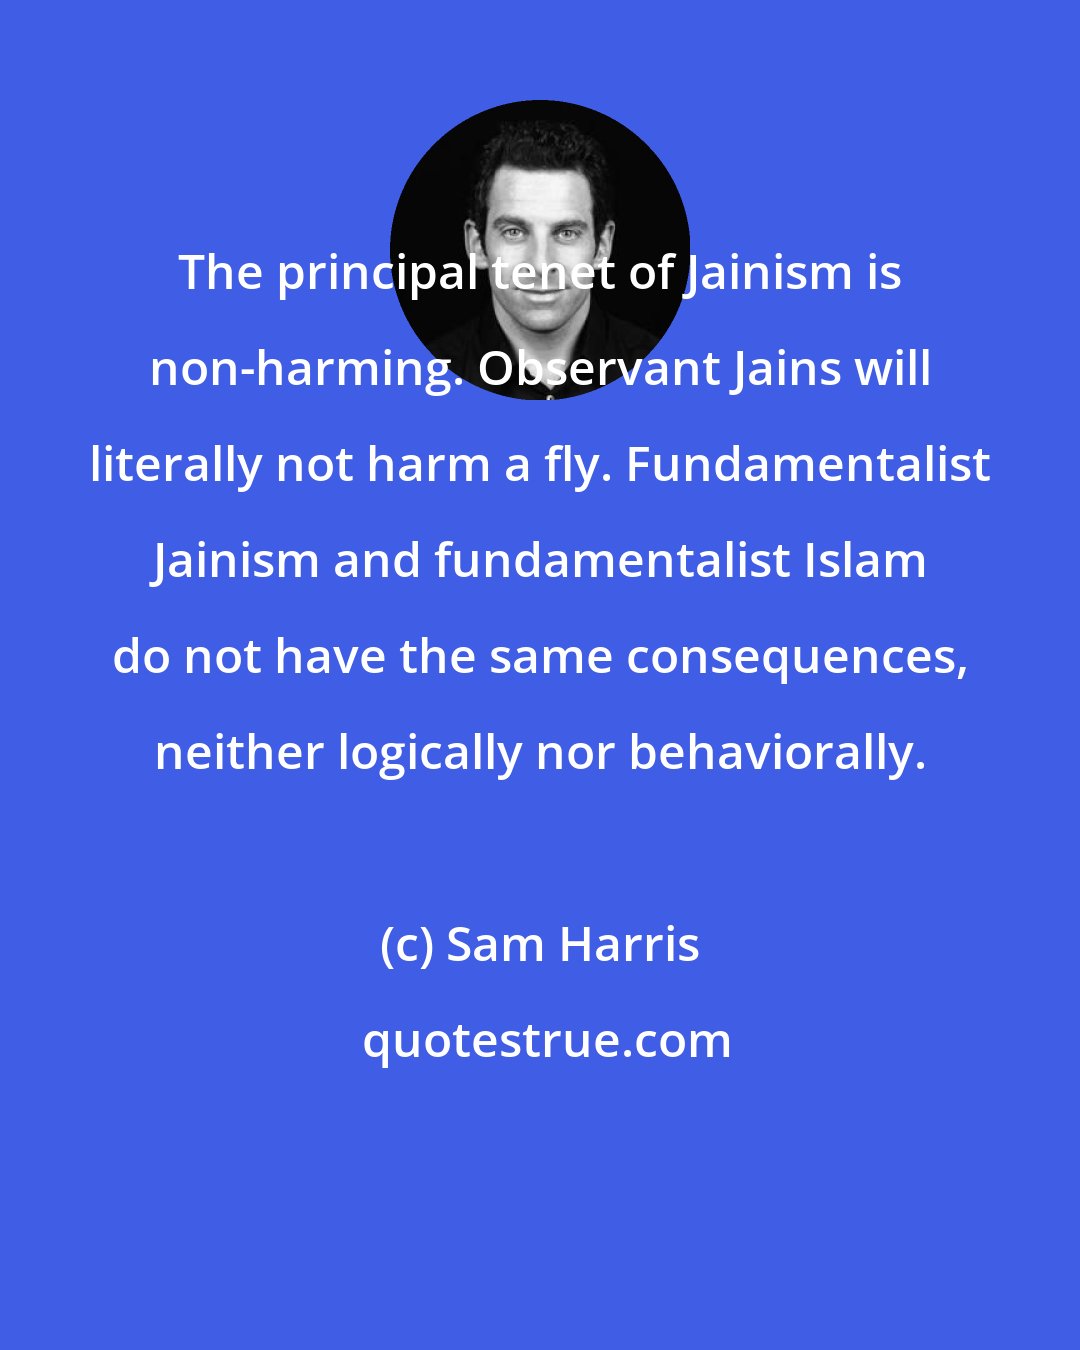 Sam Harris: The principal tenet of Jainism is non-harming. Observant Jains will literally not harm a fly. Fundamentalist Jainism and fundamentalist Islam do not have the same consequences, neither logically nor behaviorally.